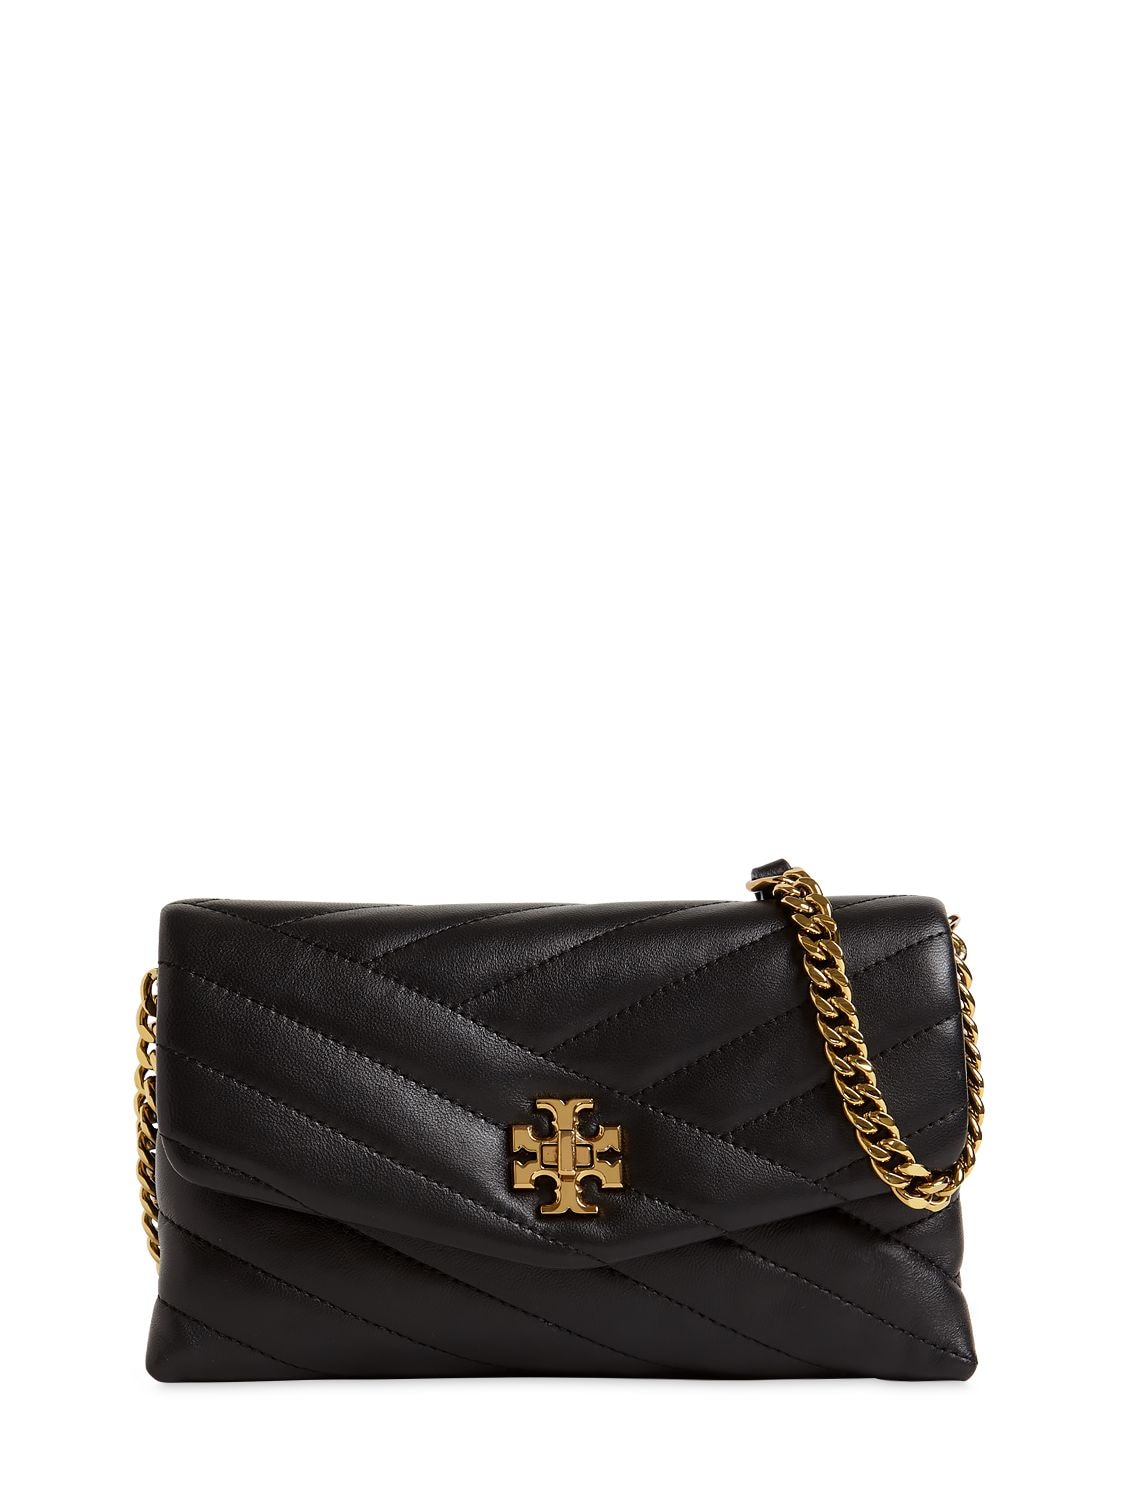 Tory Burch Kira Quilted Leather Chain Wallet Bag In Black